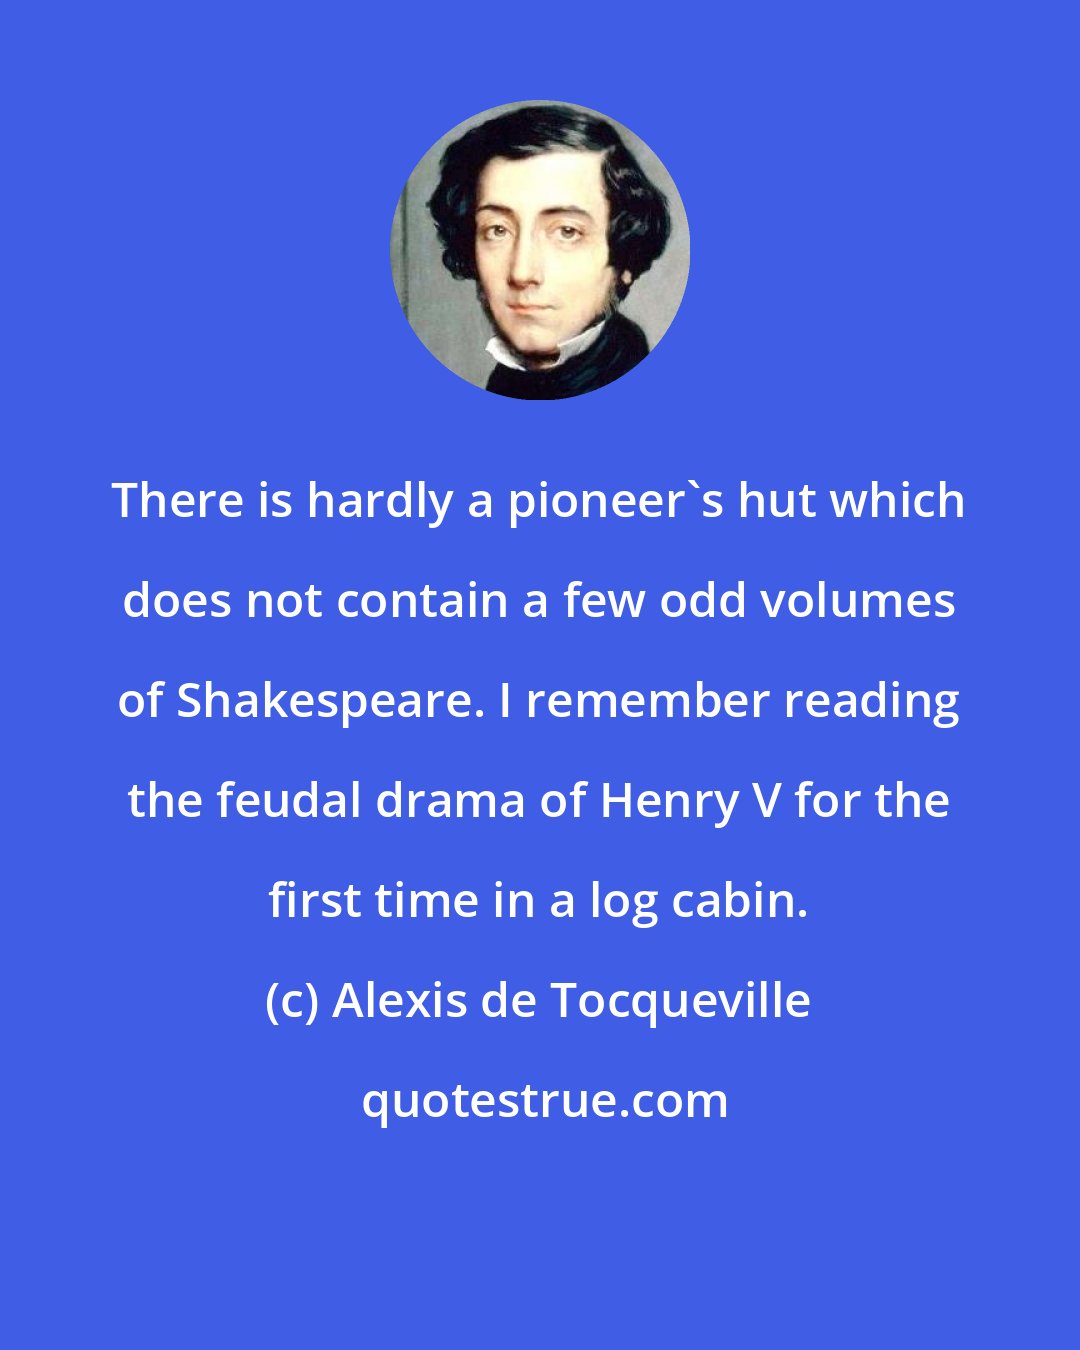 Alexis de Tocqueville: There is hardly a pioneer's hut which does not contain a few odd volumes of Shakespeare. I remember reading the feudal drama of Henry V for the first time in a log cabin.